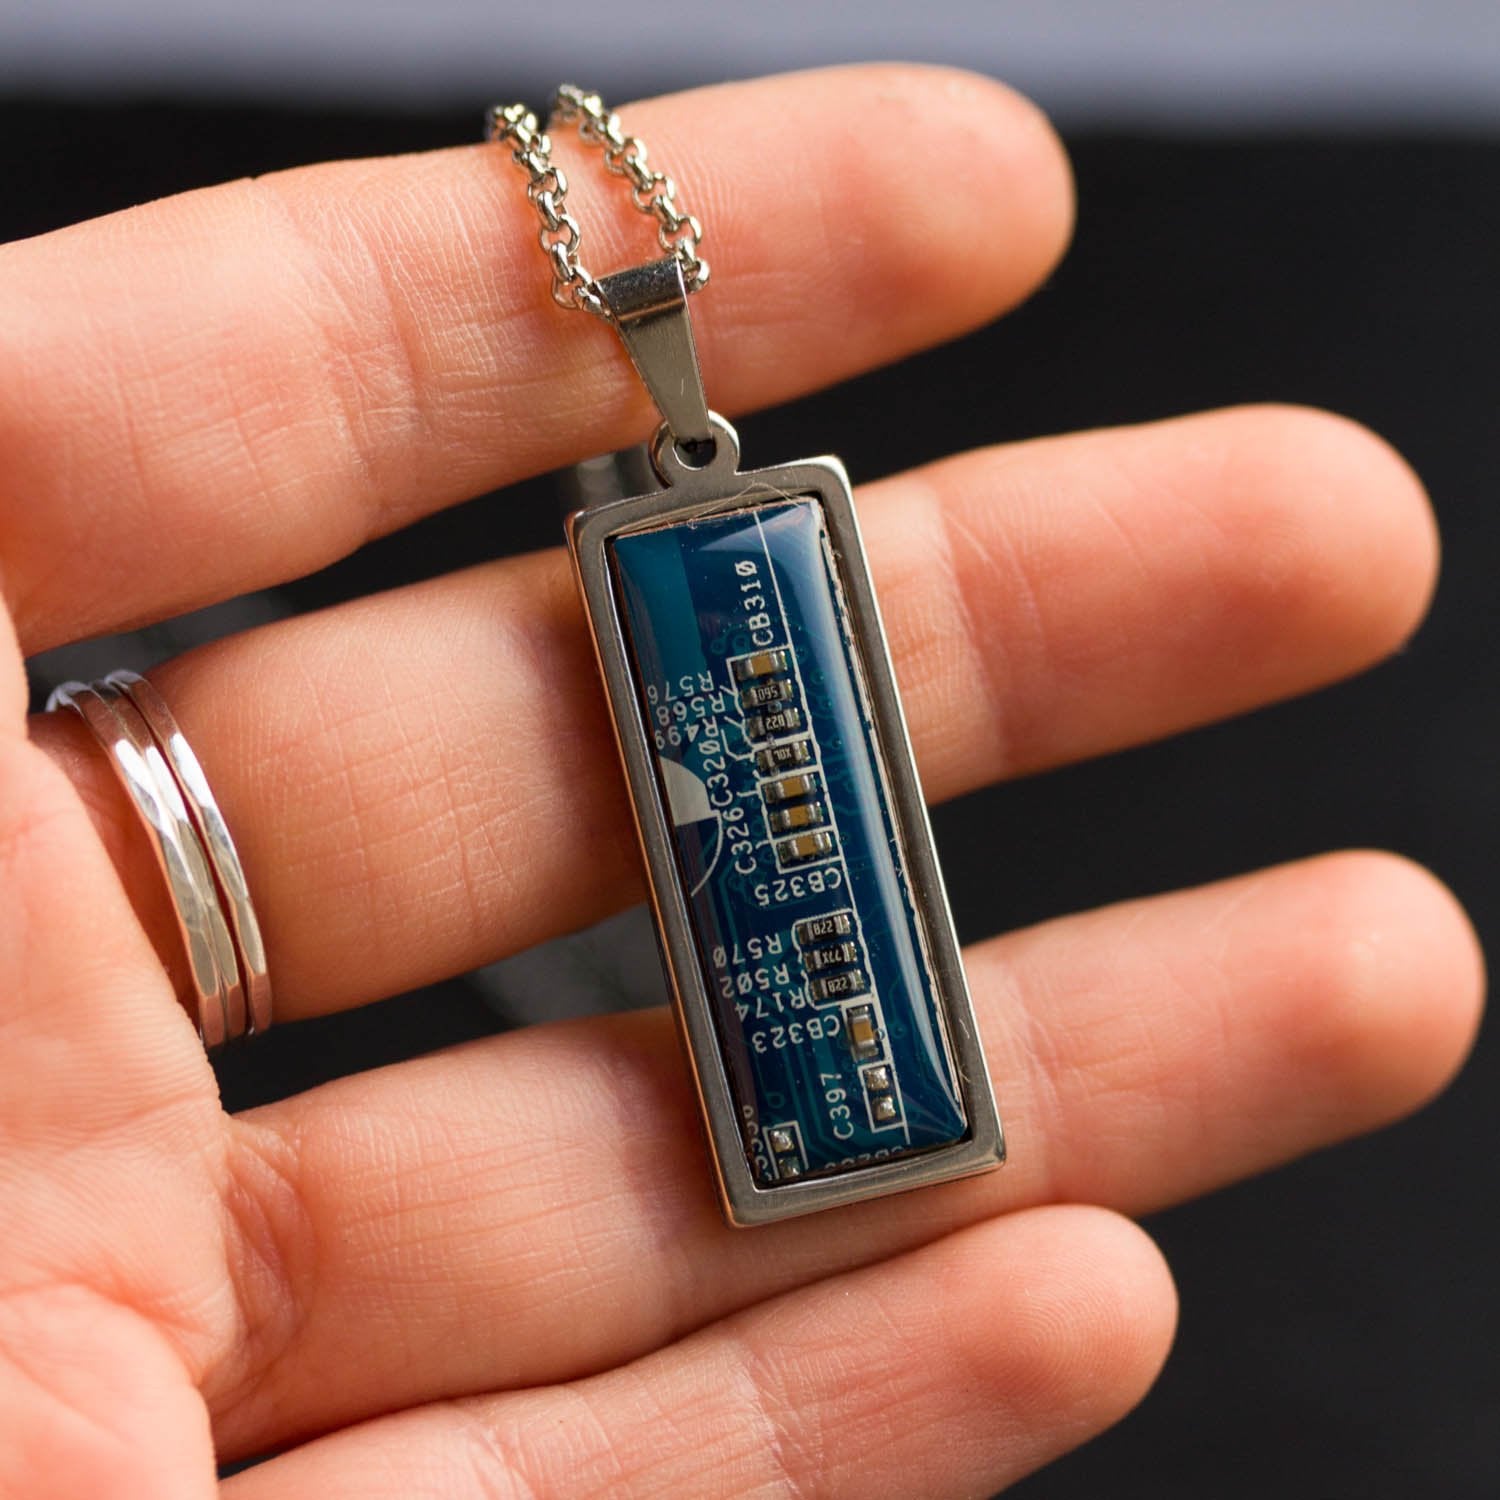 Circuit board necklace, small rectangle